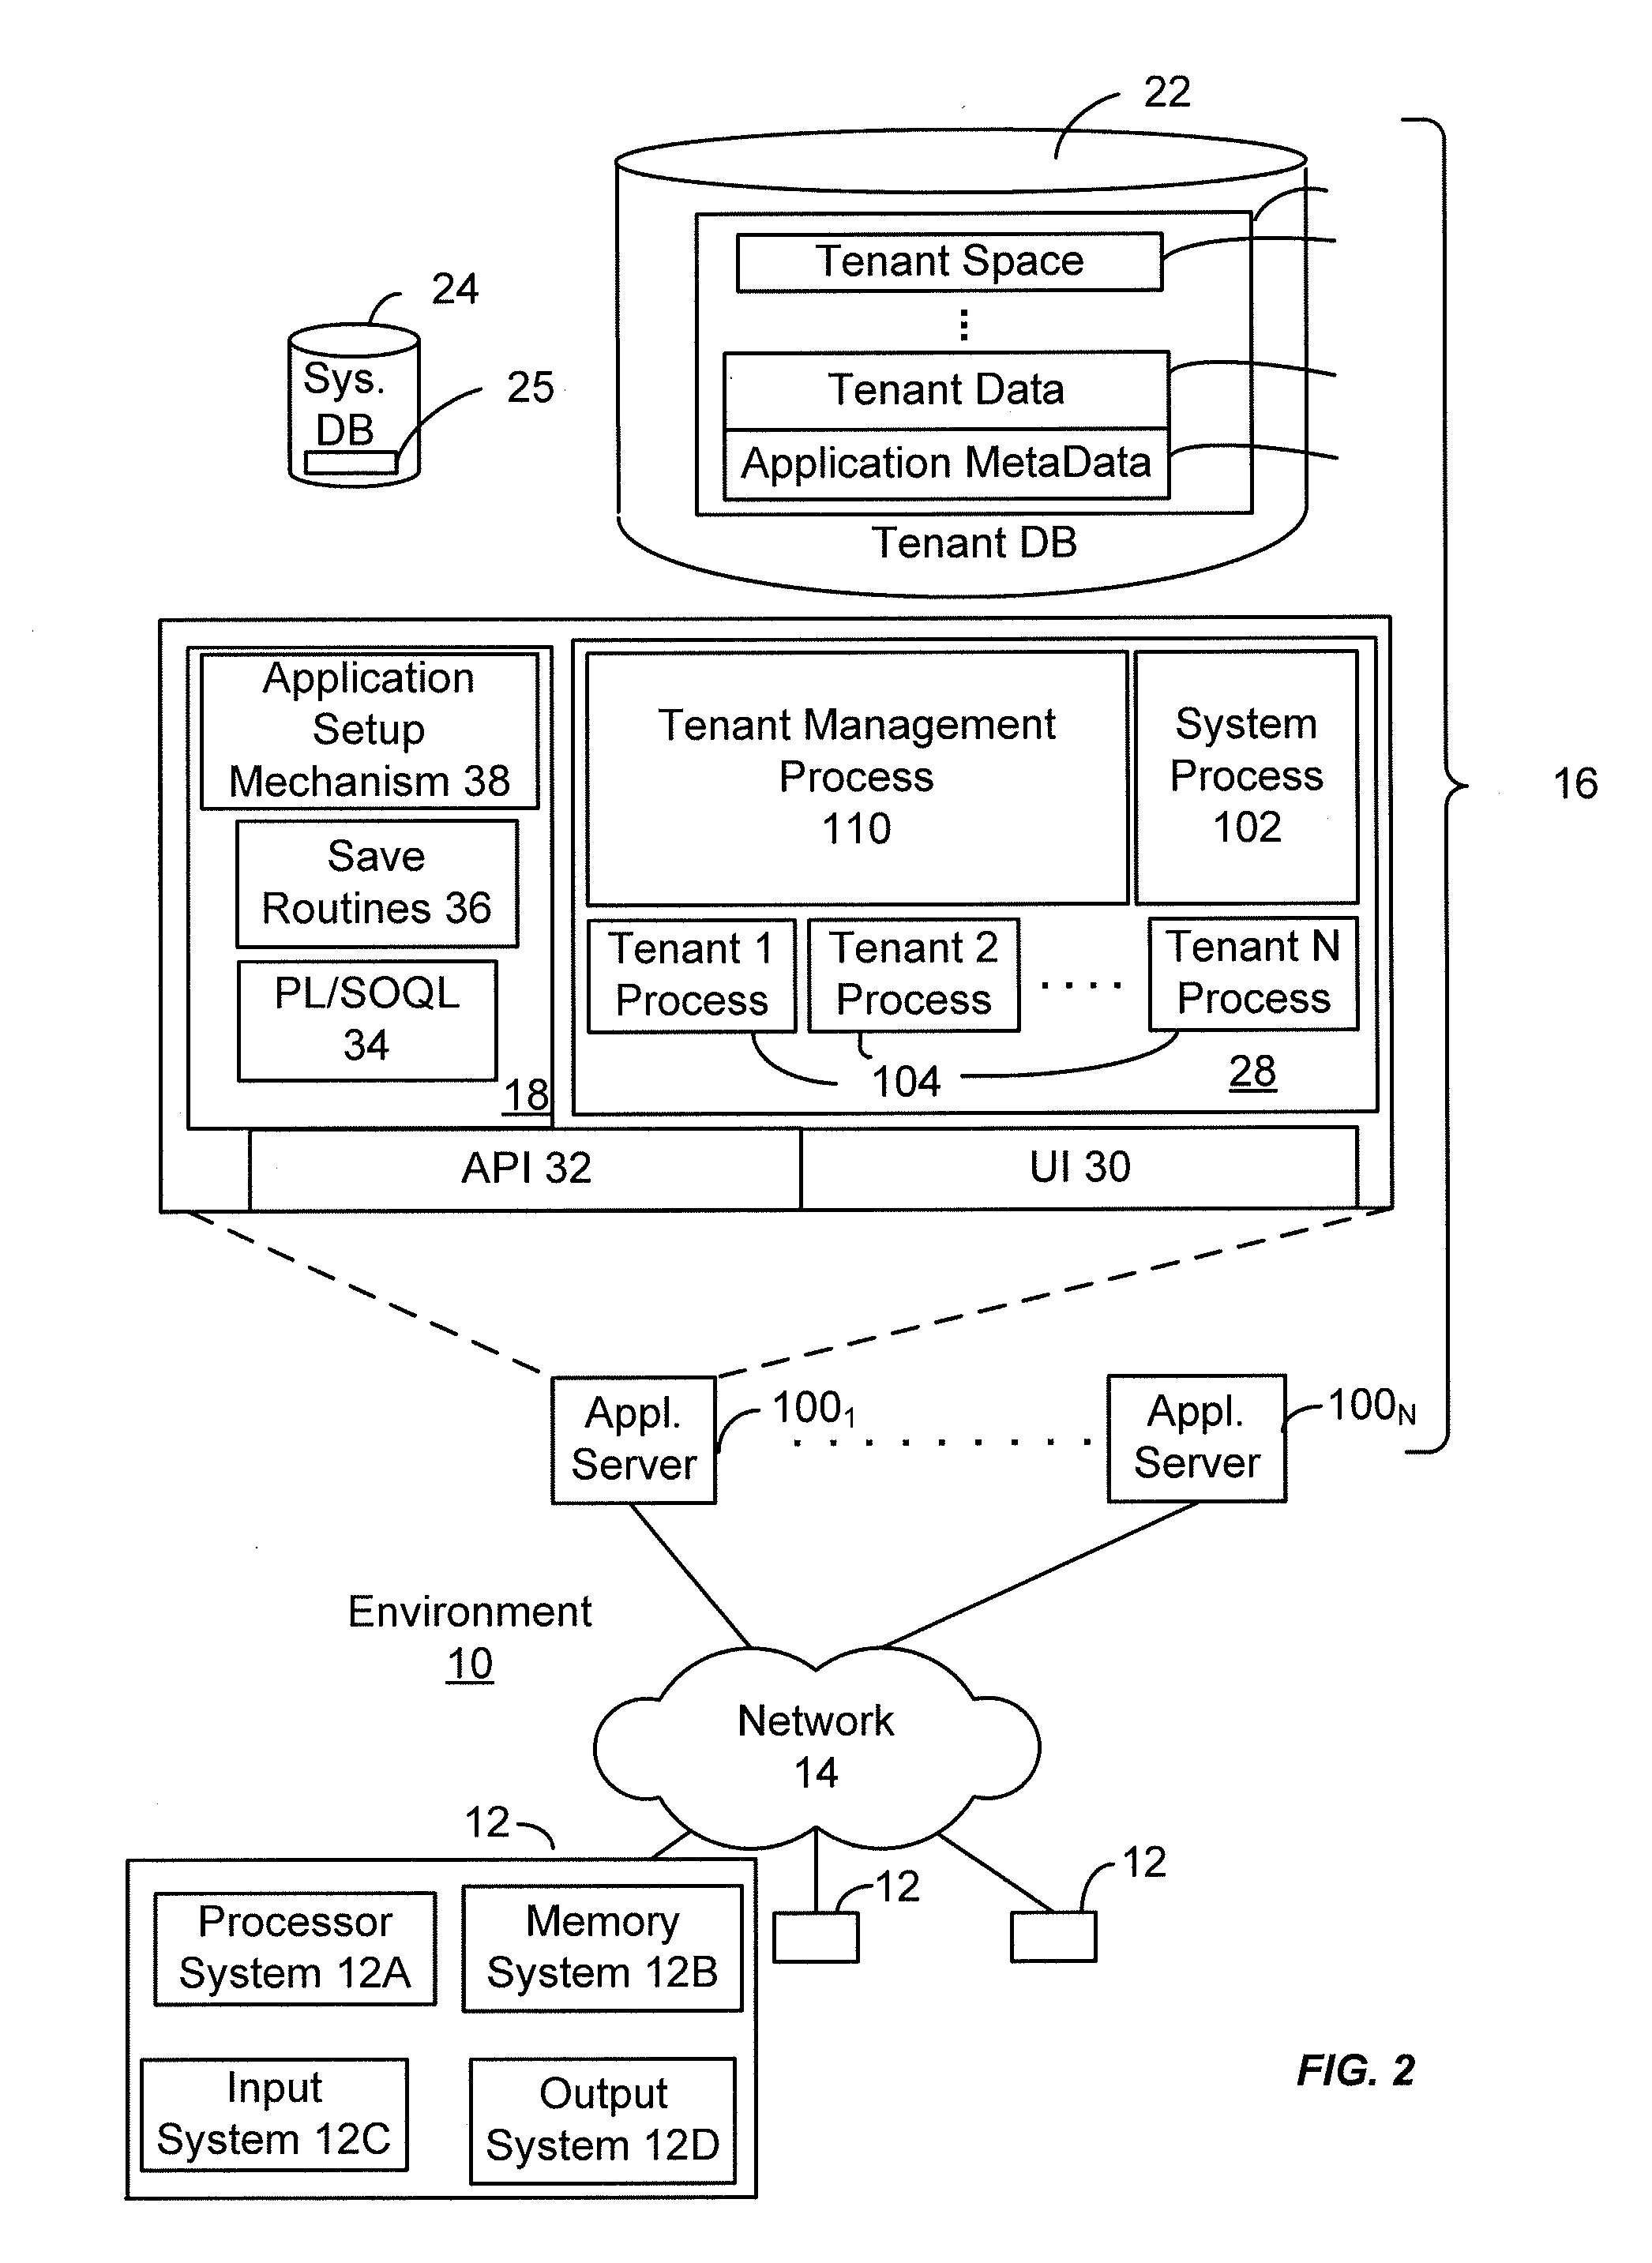 Methods and systems for providing a secure online feed in a multi-tenant database environment